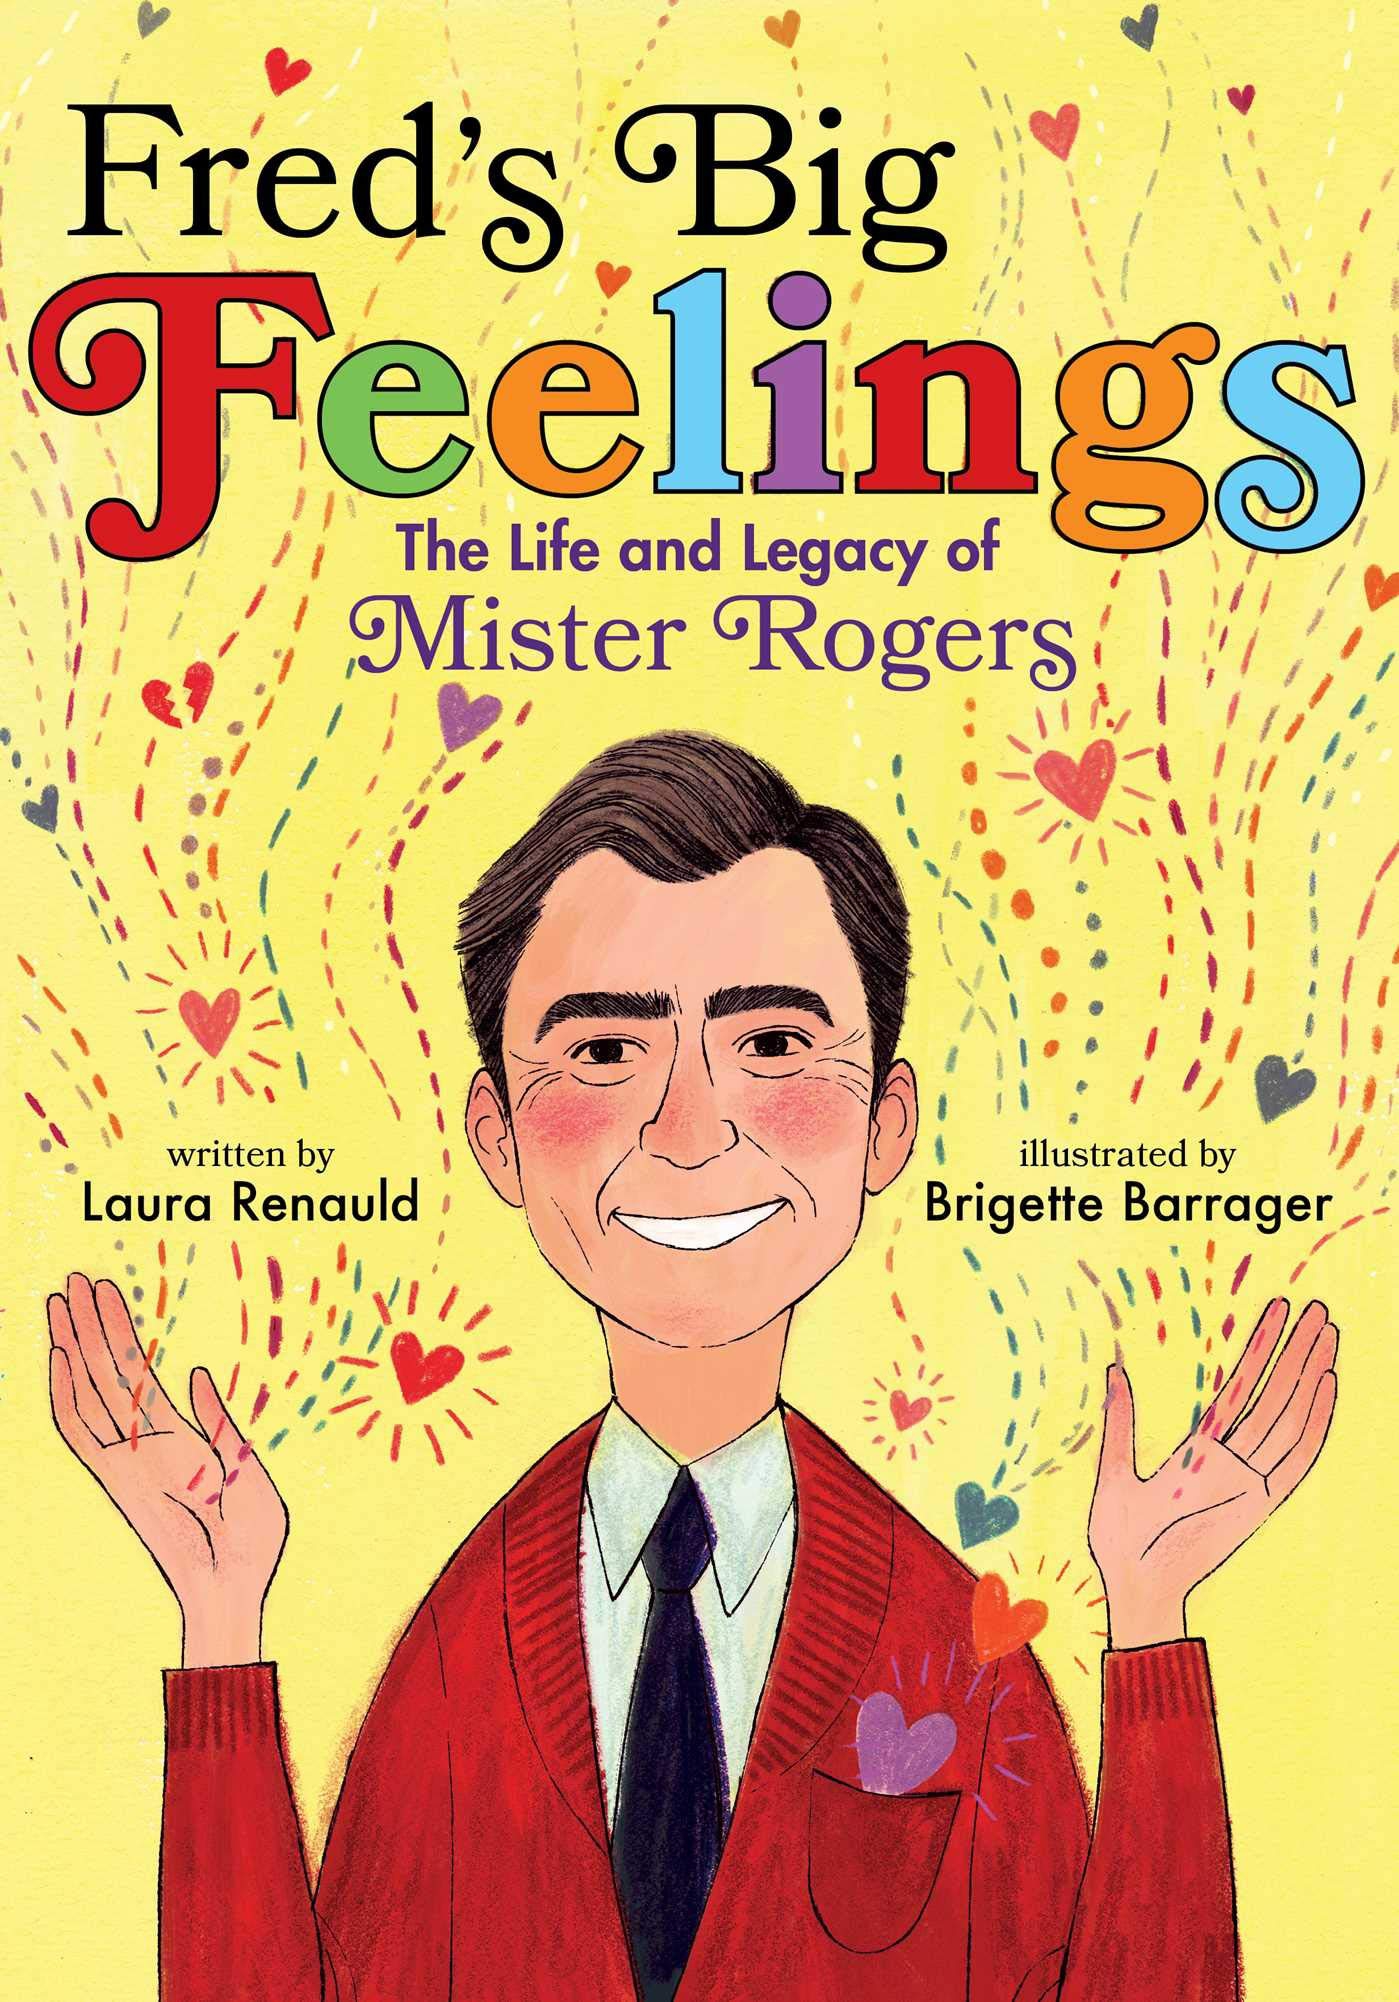 Fred’s Big Feelings: The Life and Legacy of Mister Rogers